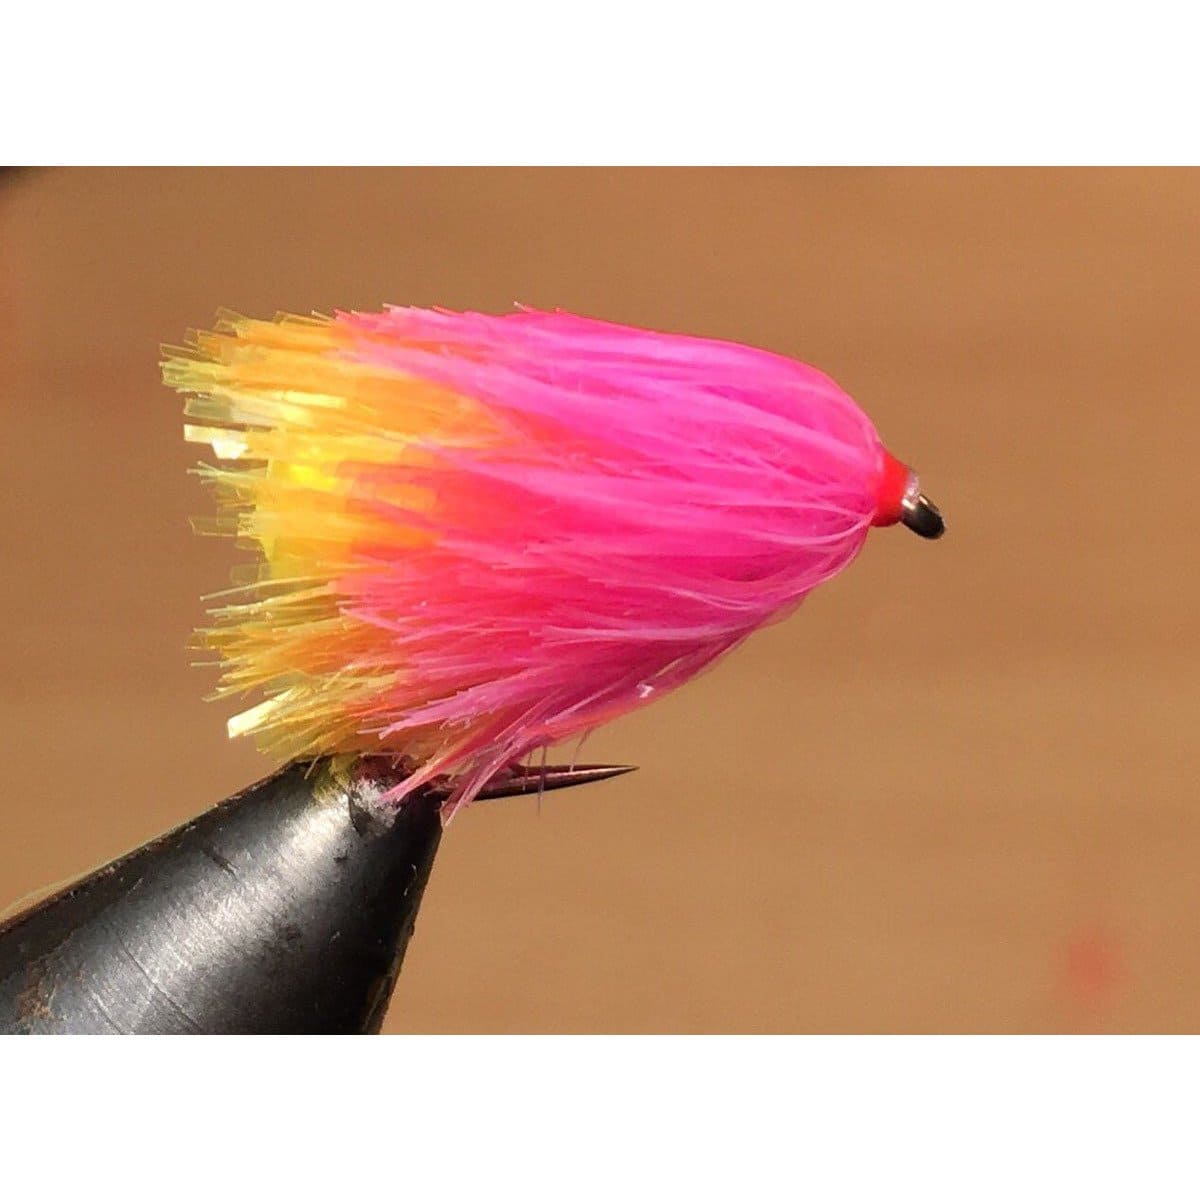 FNF Jelly - Chinook Wind Outfitters